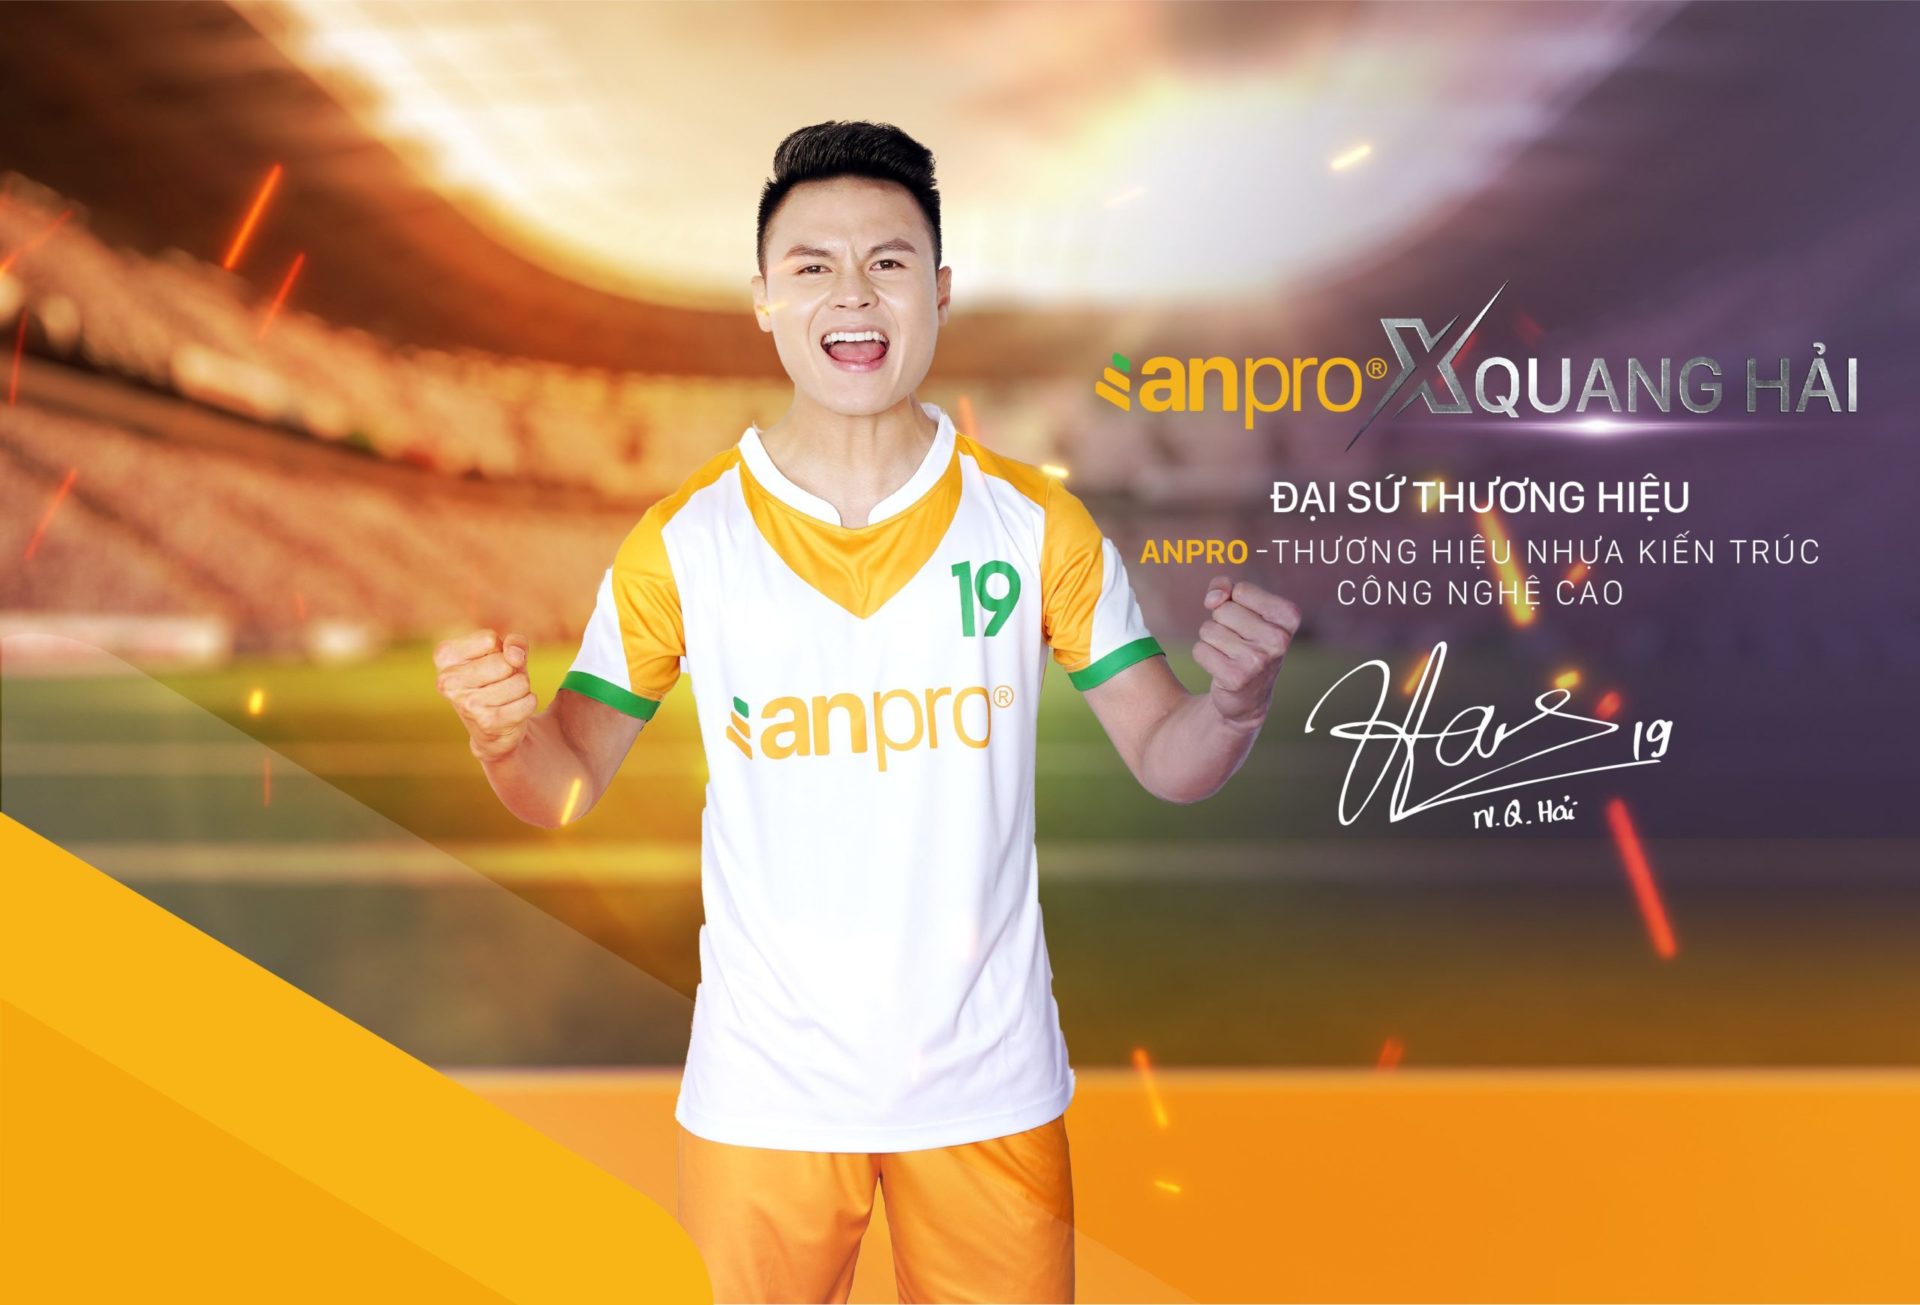 Anh bai post FB compressed scaled - Football player Nguyen Quang Hai continues to be an ambassador for AnPro - An Phat Holdings’ high-technology architecture plastic brand